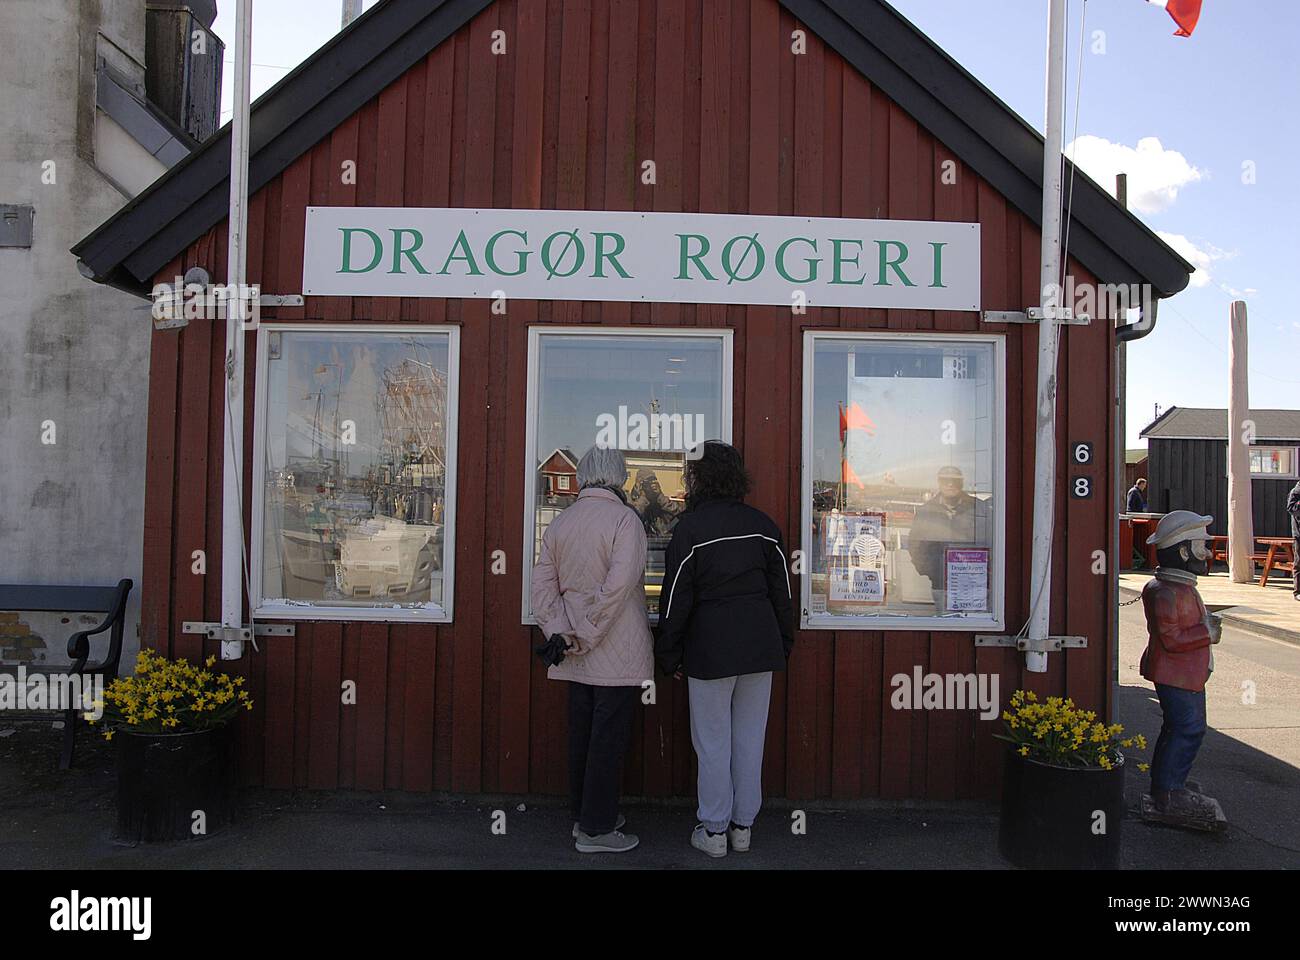 DRAGOR/DRAGOER/.Denmark 22 April 2016  Dragor smokehouse dragør røgerionly sell smoke fish at small fishing habour .Photo. Francis Joseph Dean/Deanpictures. Stock Photo